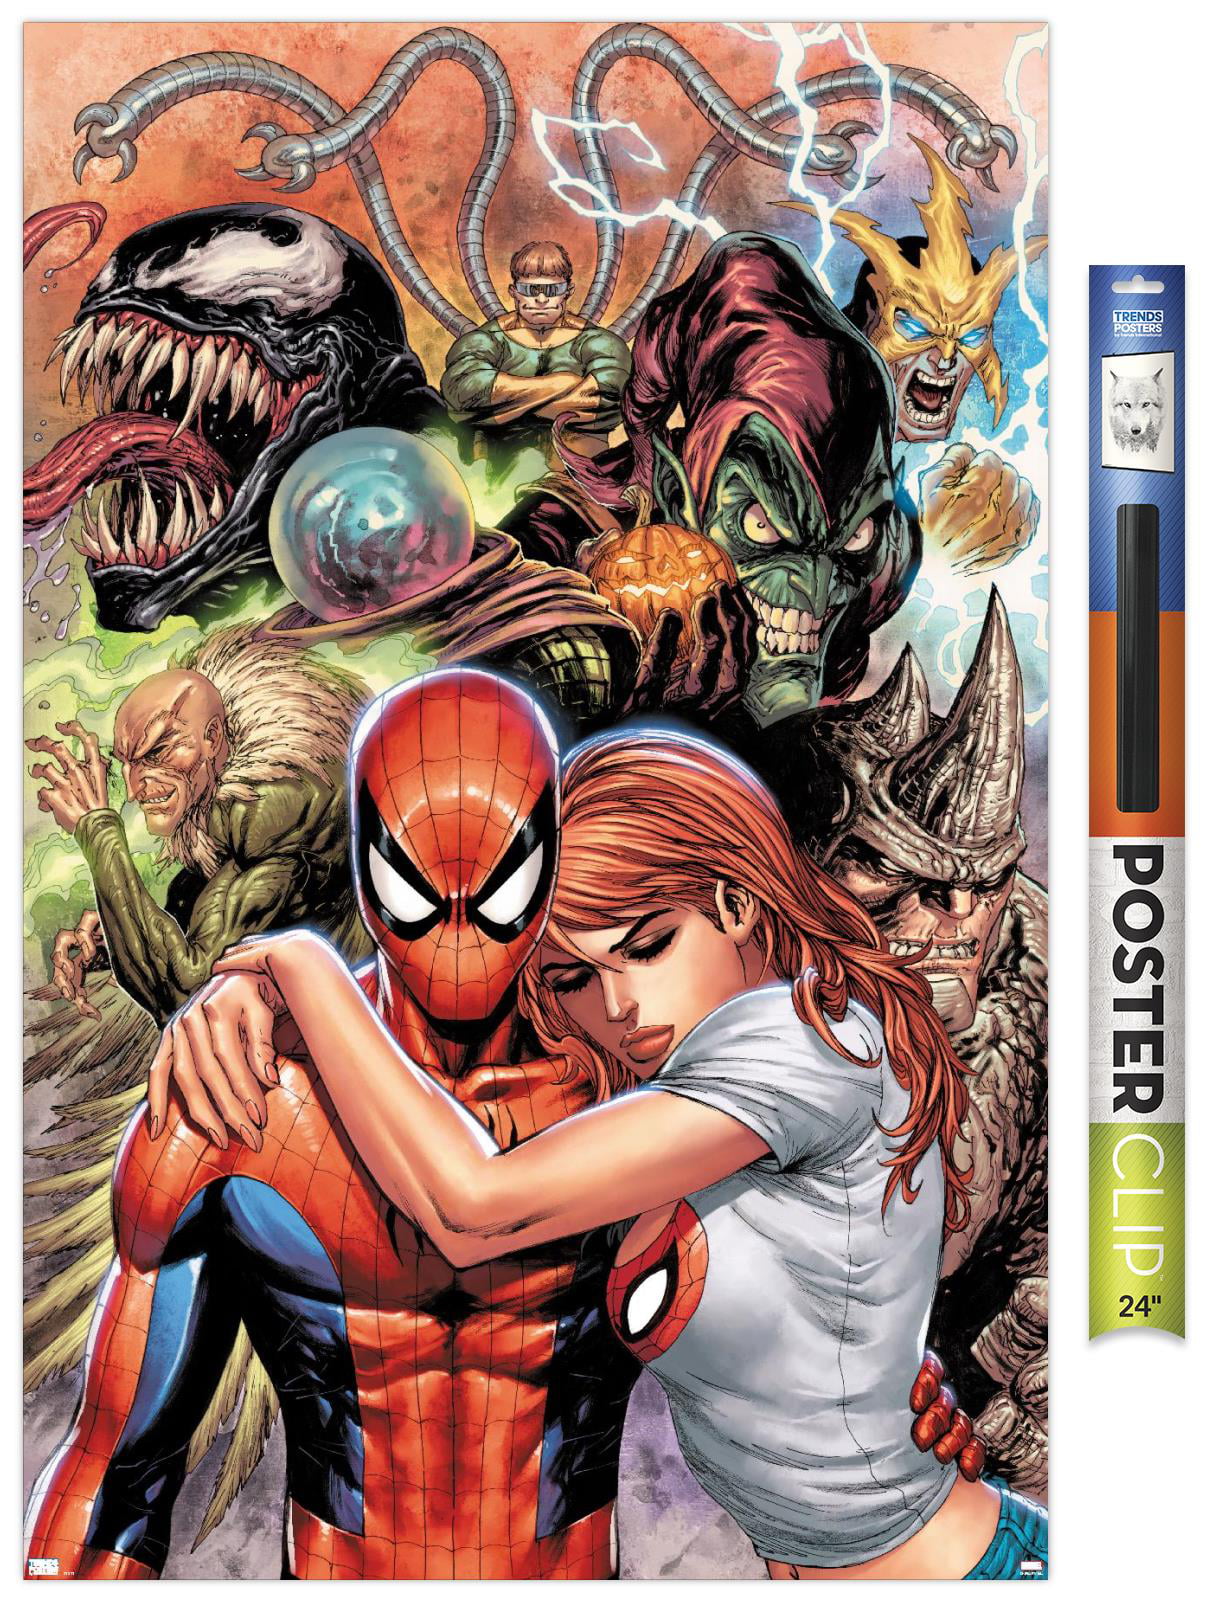 Marvel Comics - The Sinister Six - Amazing Spider-Man: Renew Your